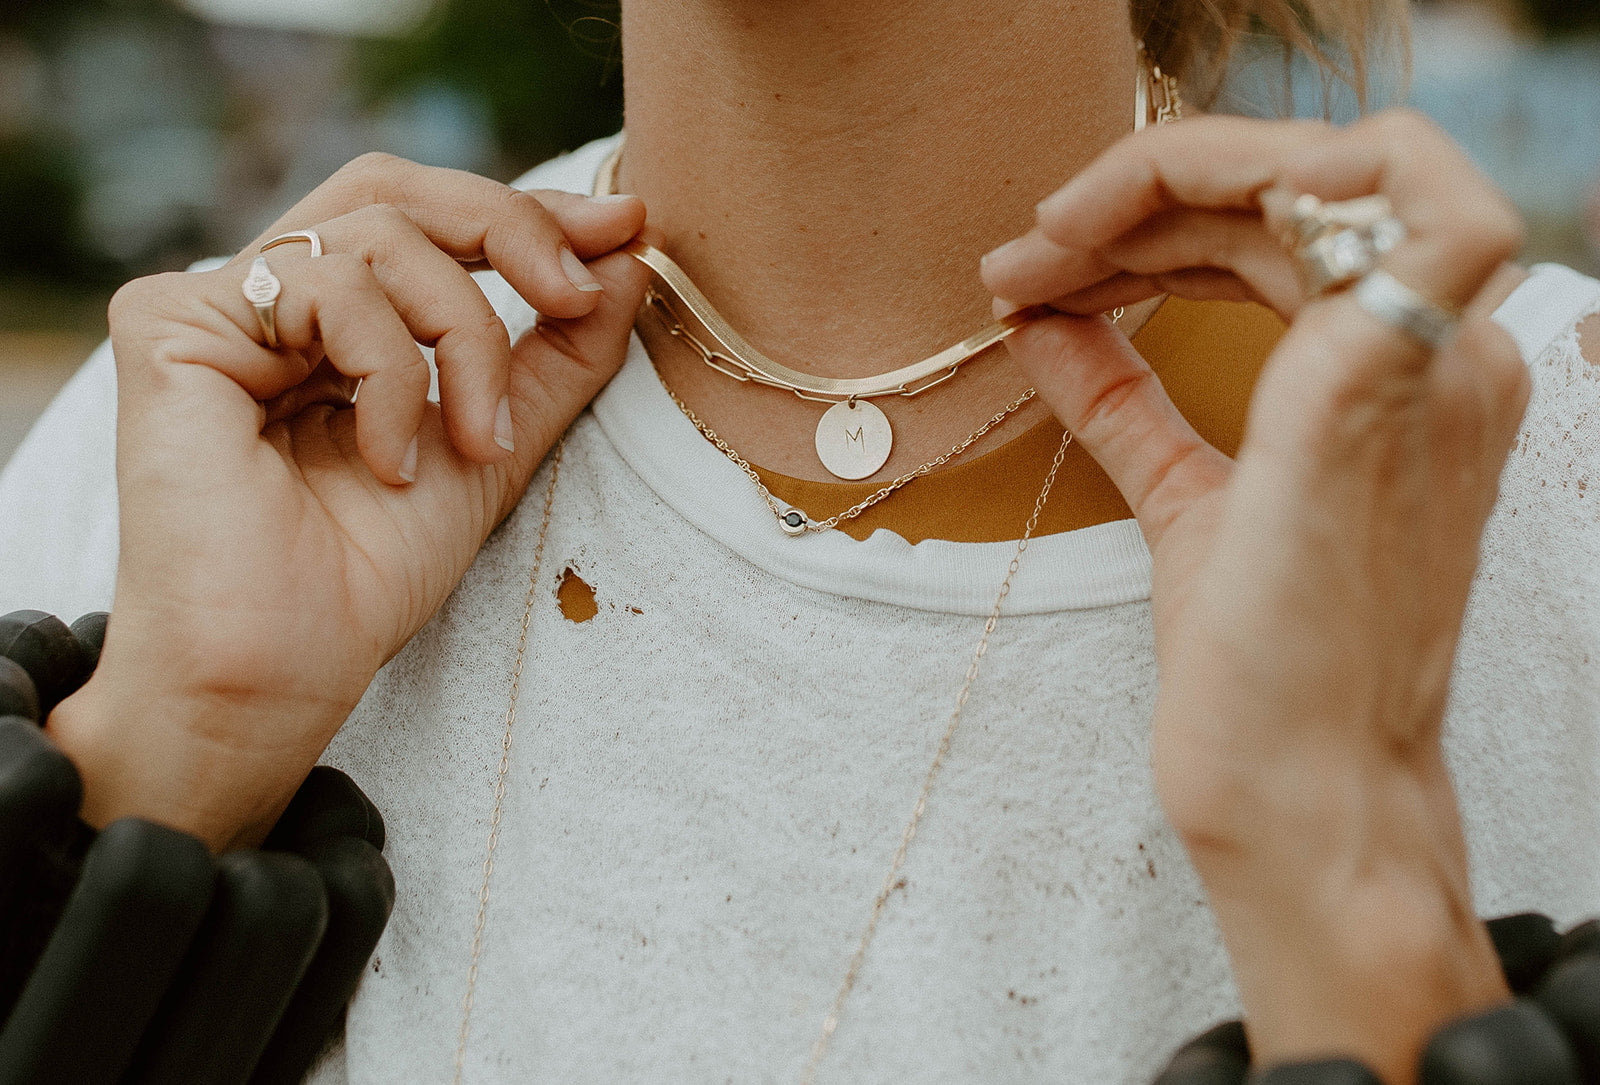 Shop Sustainable - Even Your Jewelry